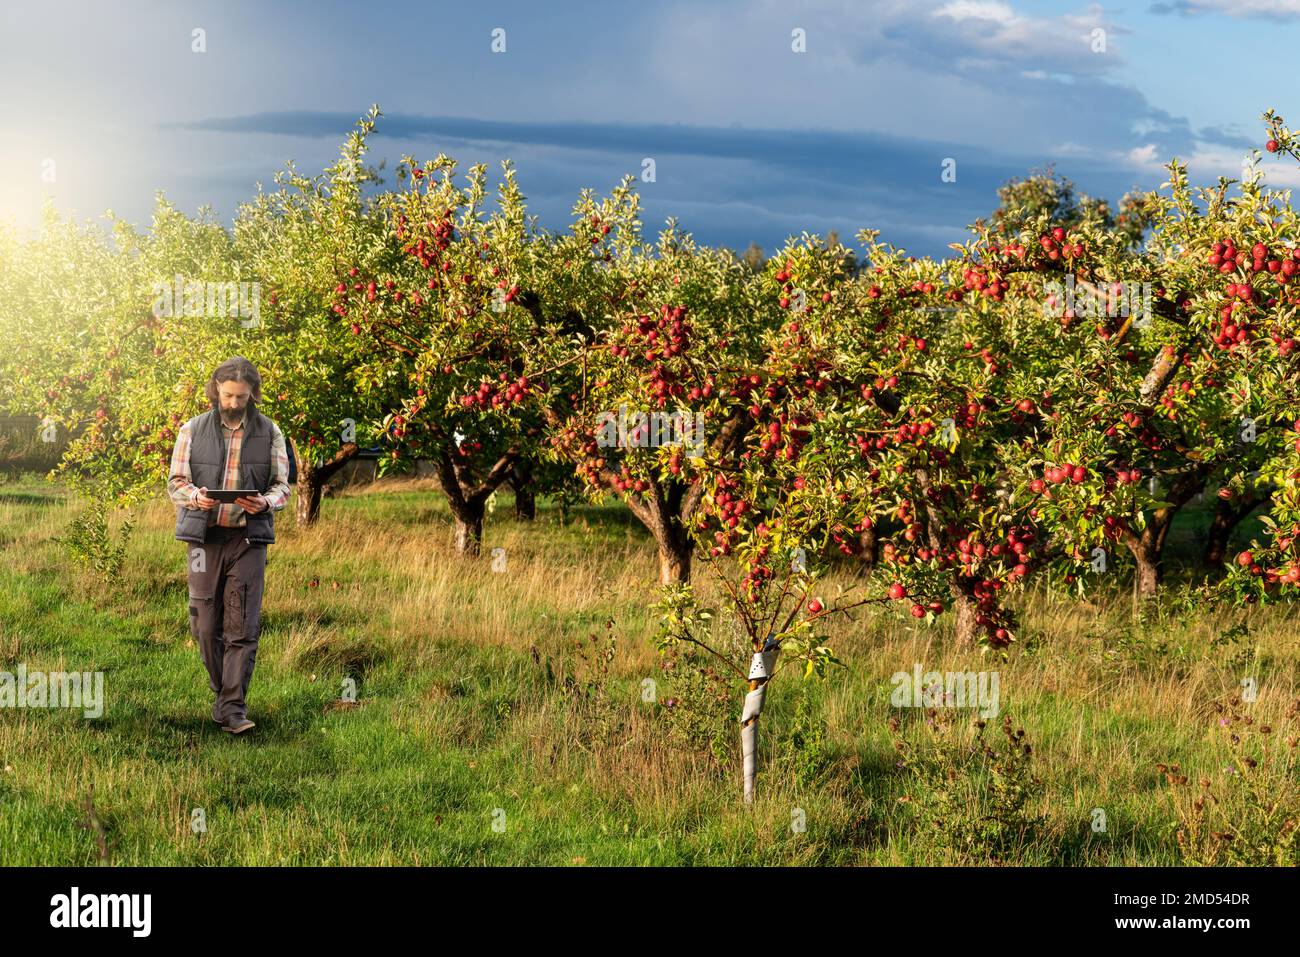 Farmer examines the garden of fruits and sends data to the cloud from the tablet. Smart farming and digital agriculture Stock Photo